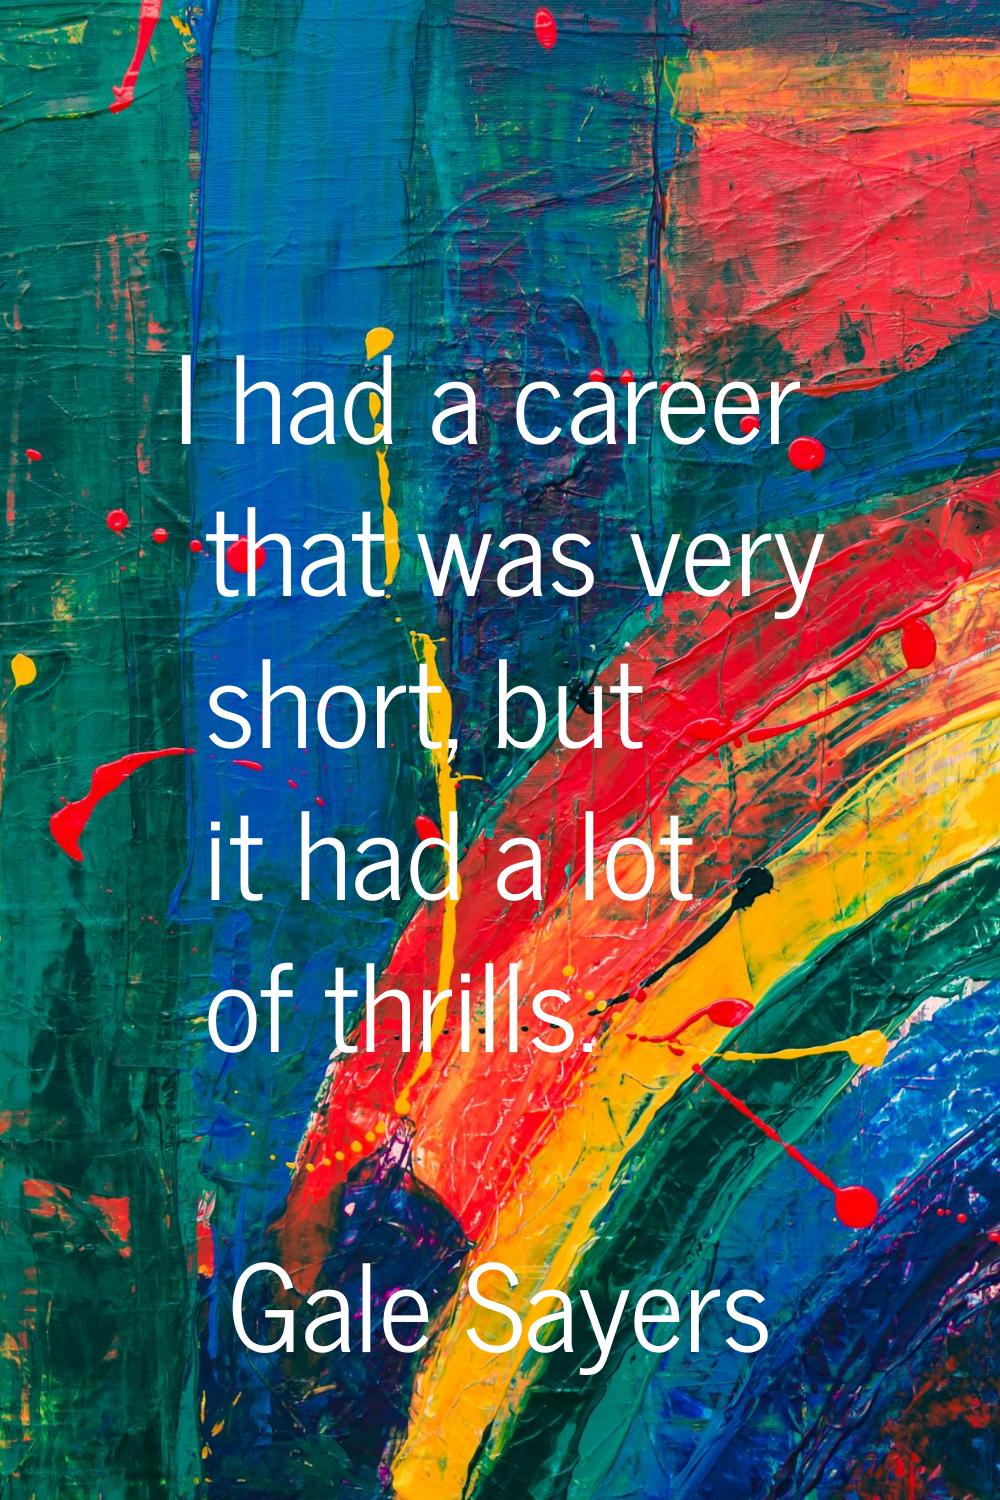 I had a career that was very short, but it had a lot of thrills.